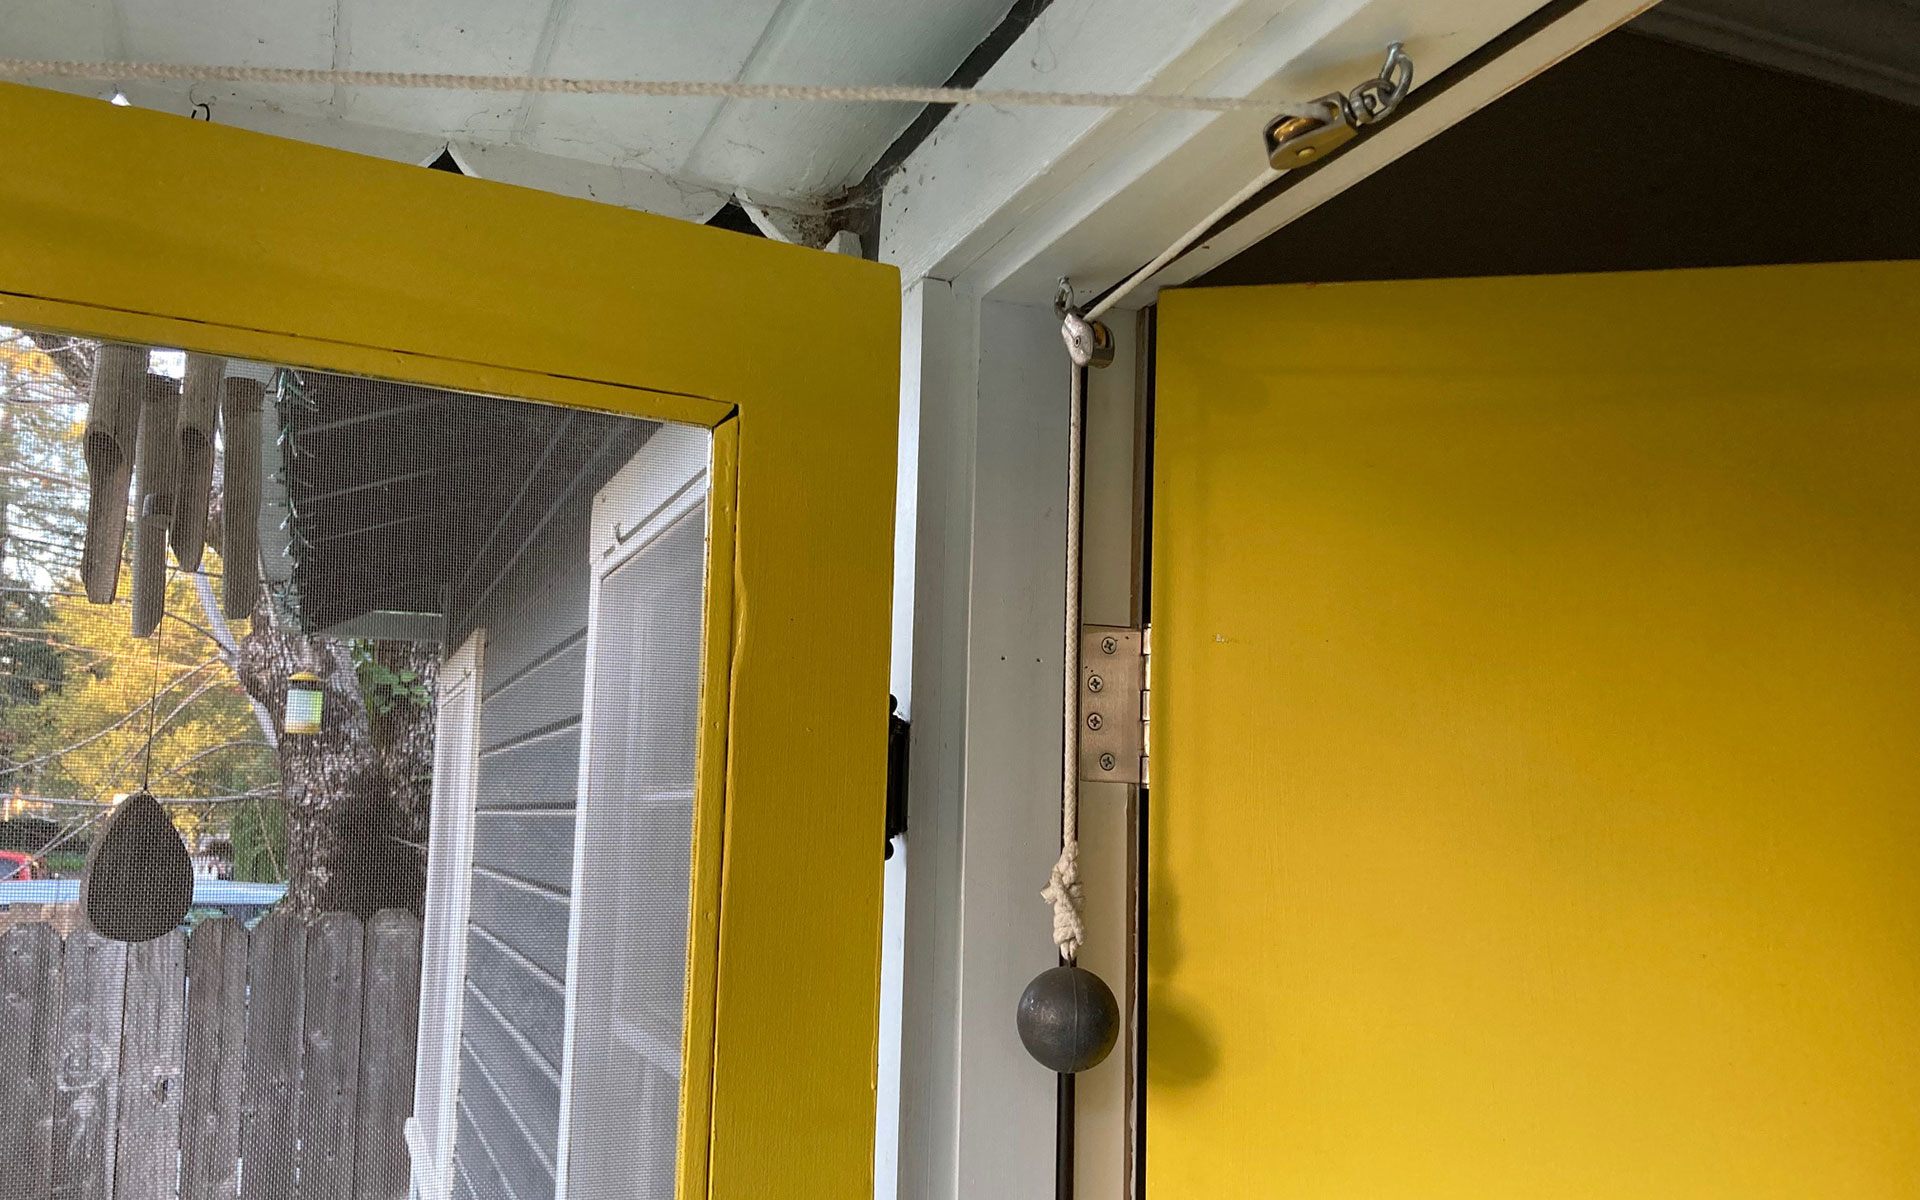 a rope-and-pulley contraption attached to a yellow screen door